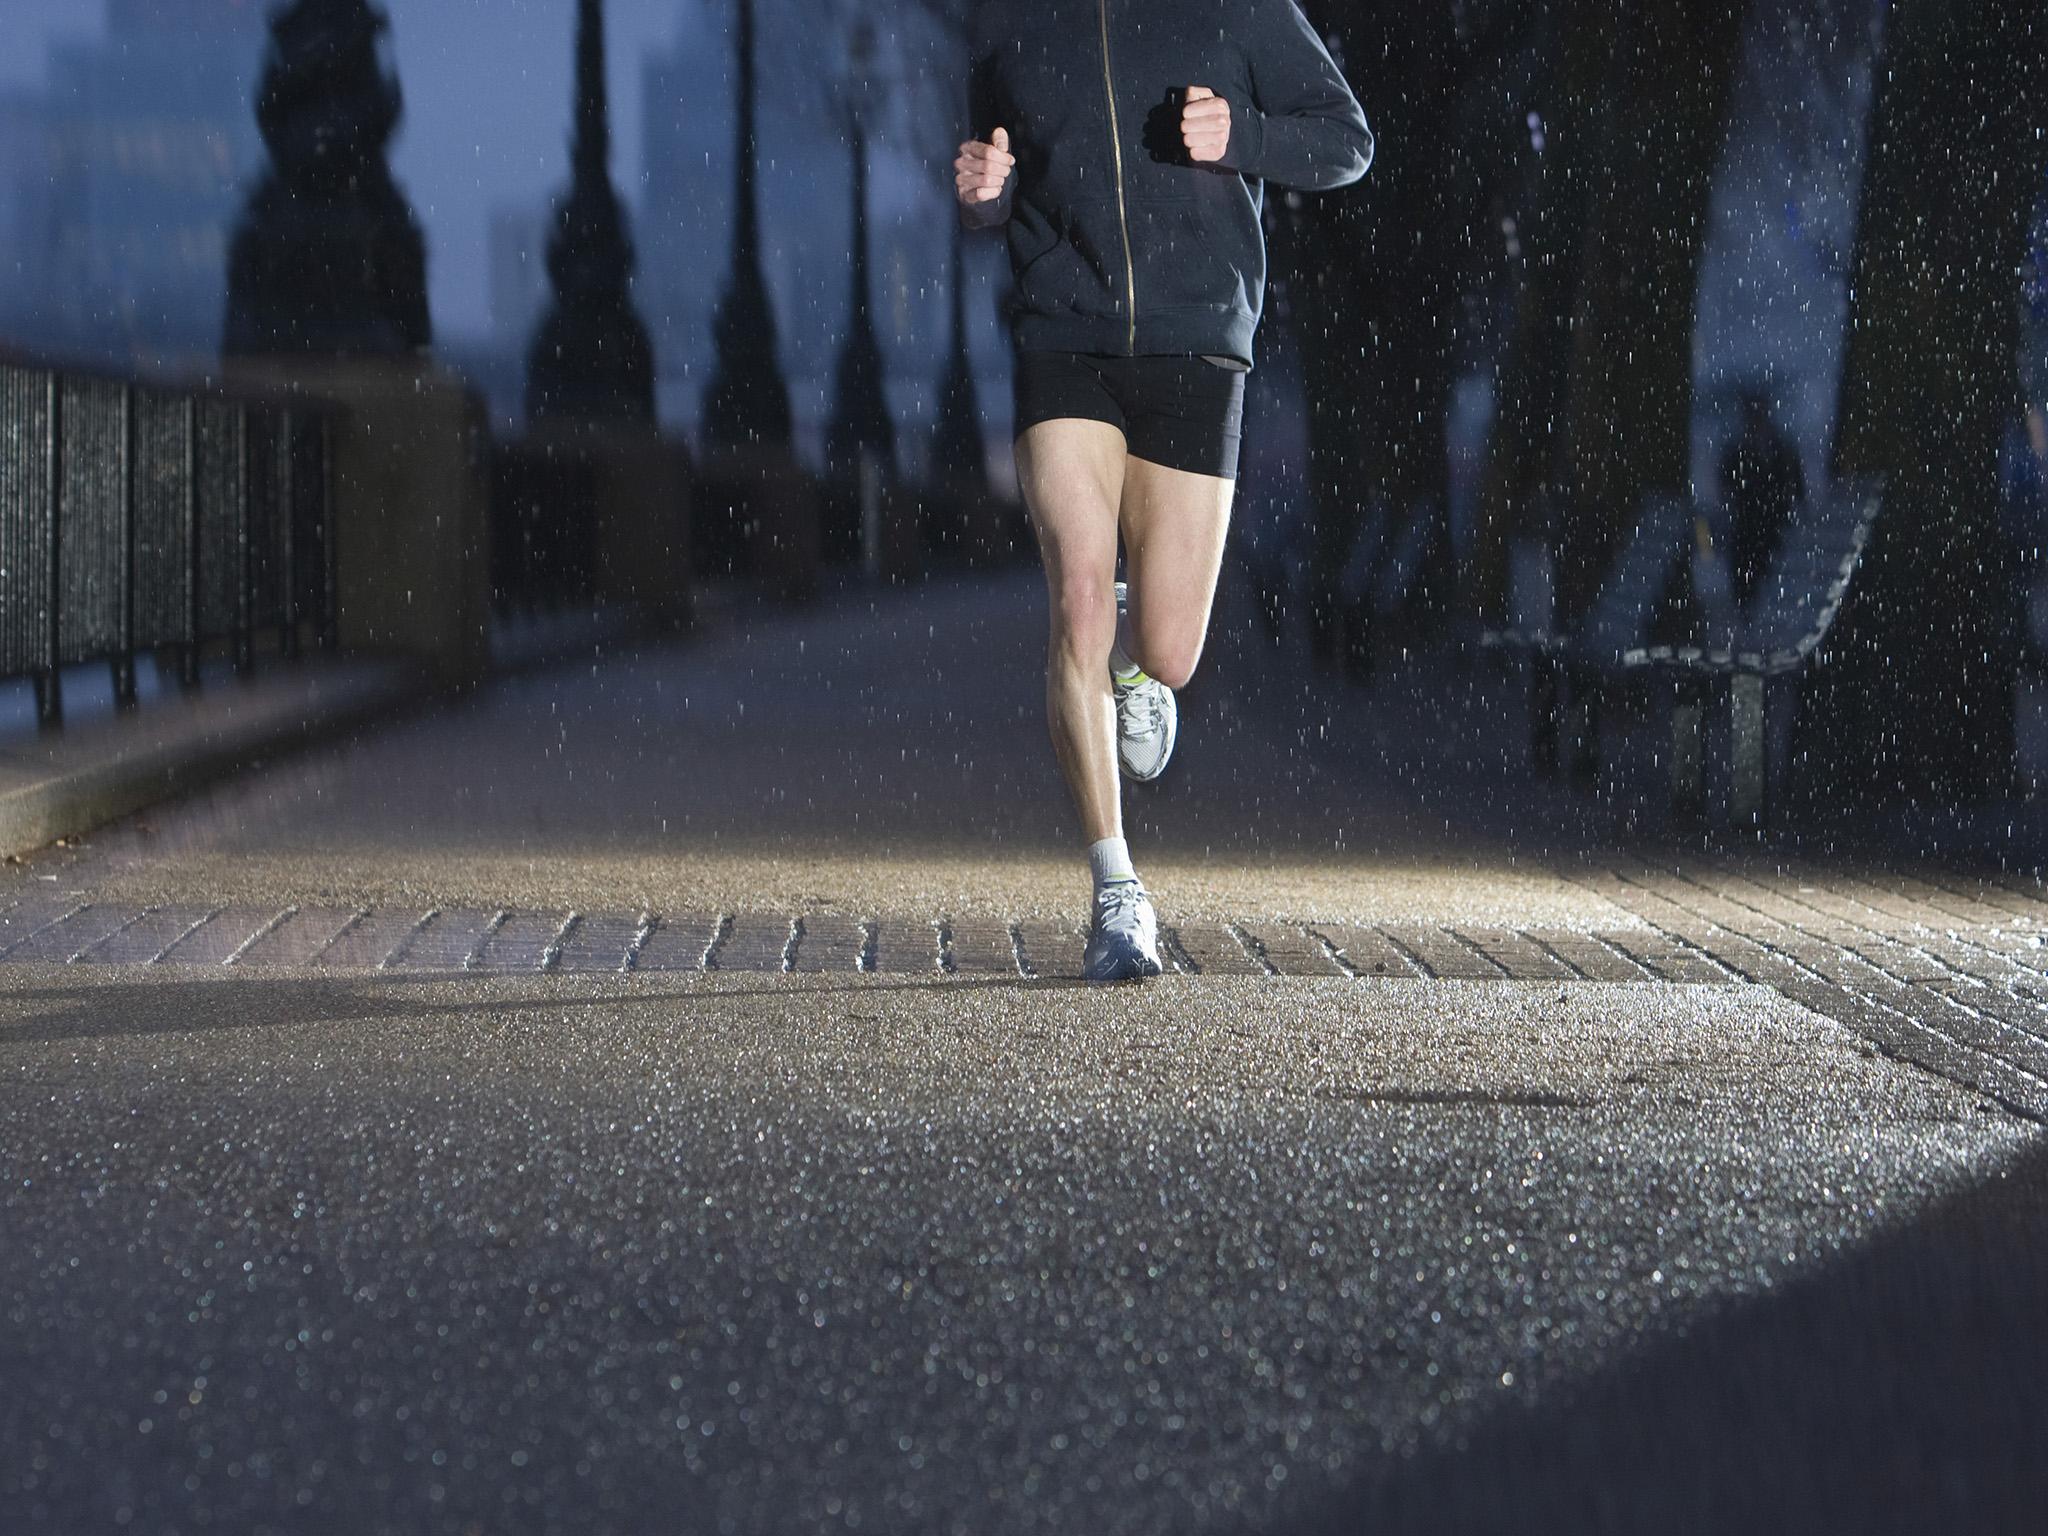 Recent research suggests running allows the brain to rest and reduces the need for sleep